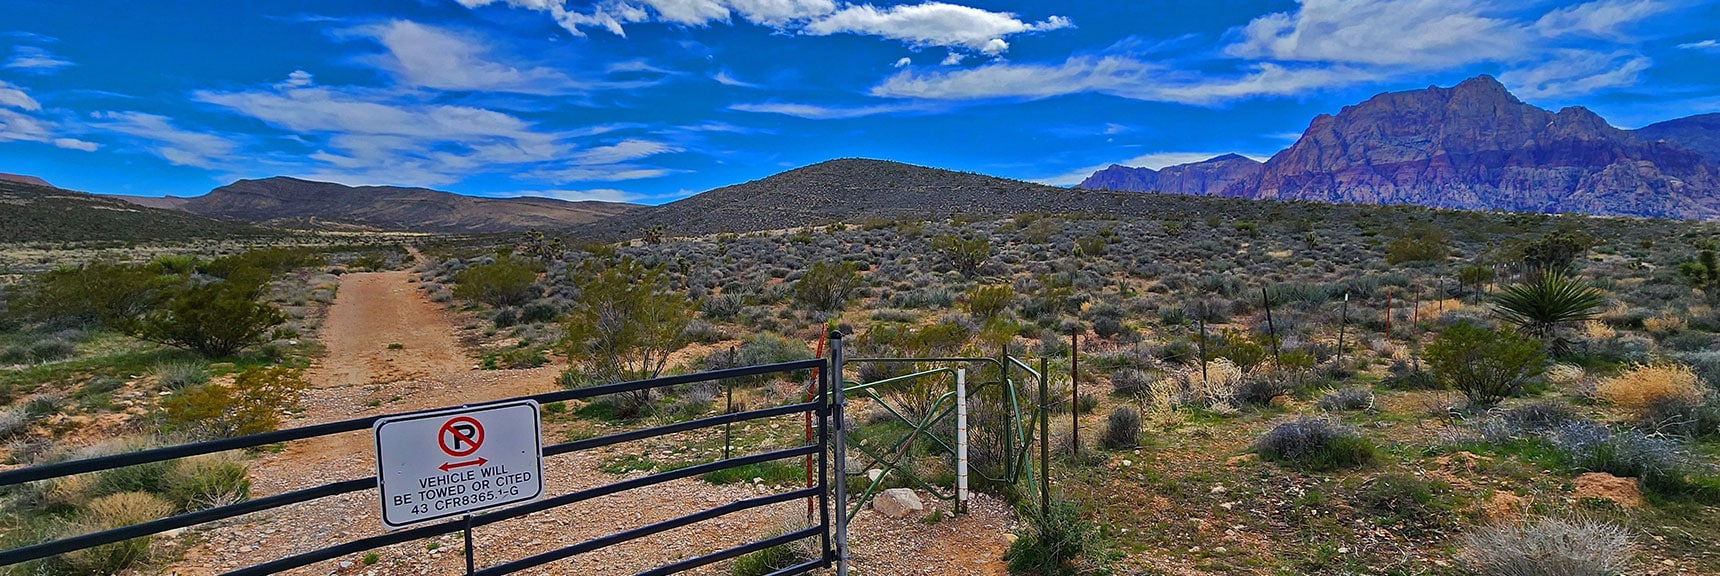 If You Started at North End of Ridgeline, Head for Hill to Right. | Western High Ridge | Blue Diamond Hill, Nevada